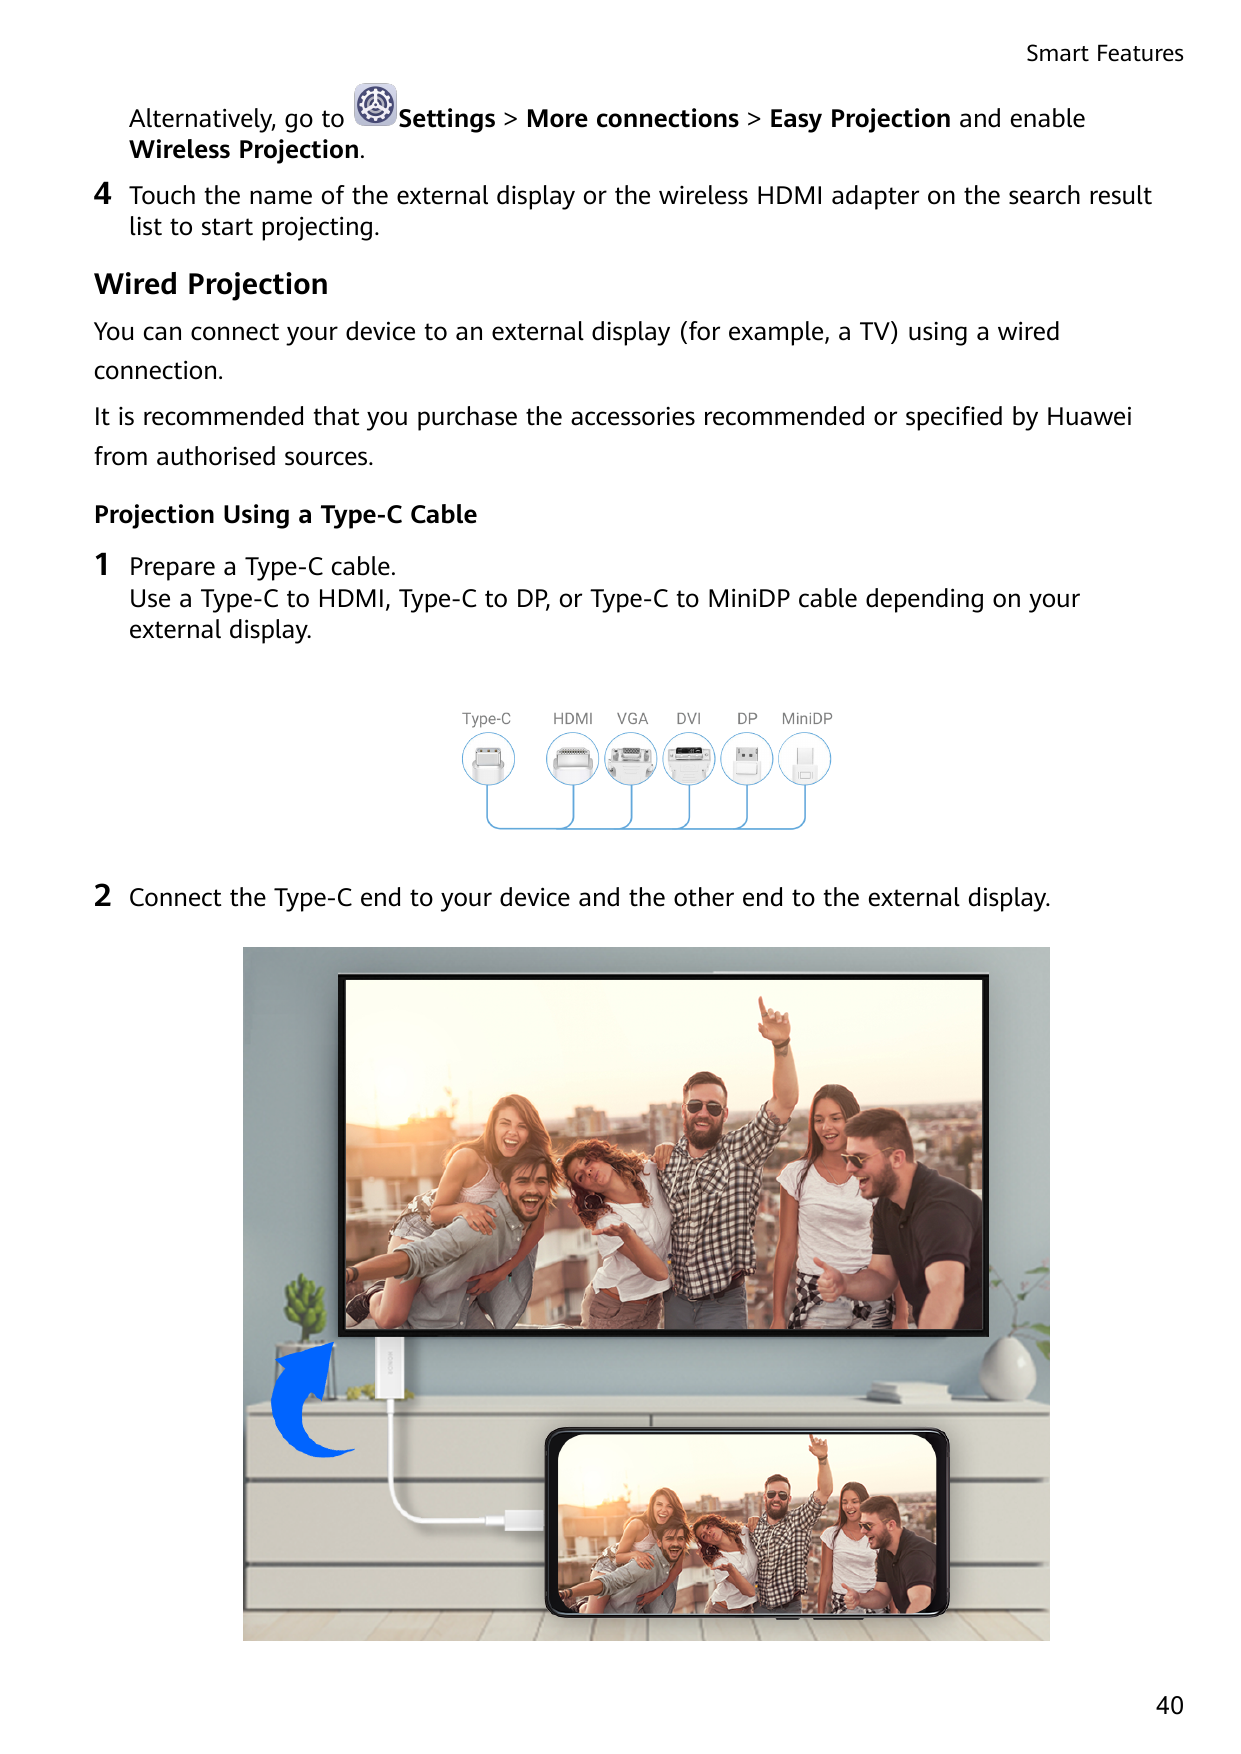 Smart FeaturesAlternatively, go toWireless Projection.4Settings > More connections > Easy Projection and enableTouch the name of